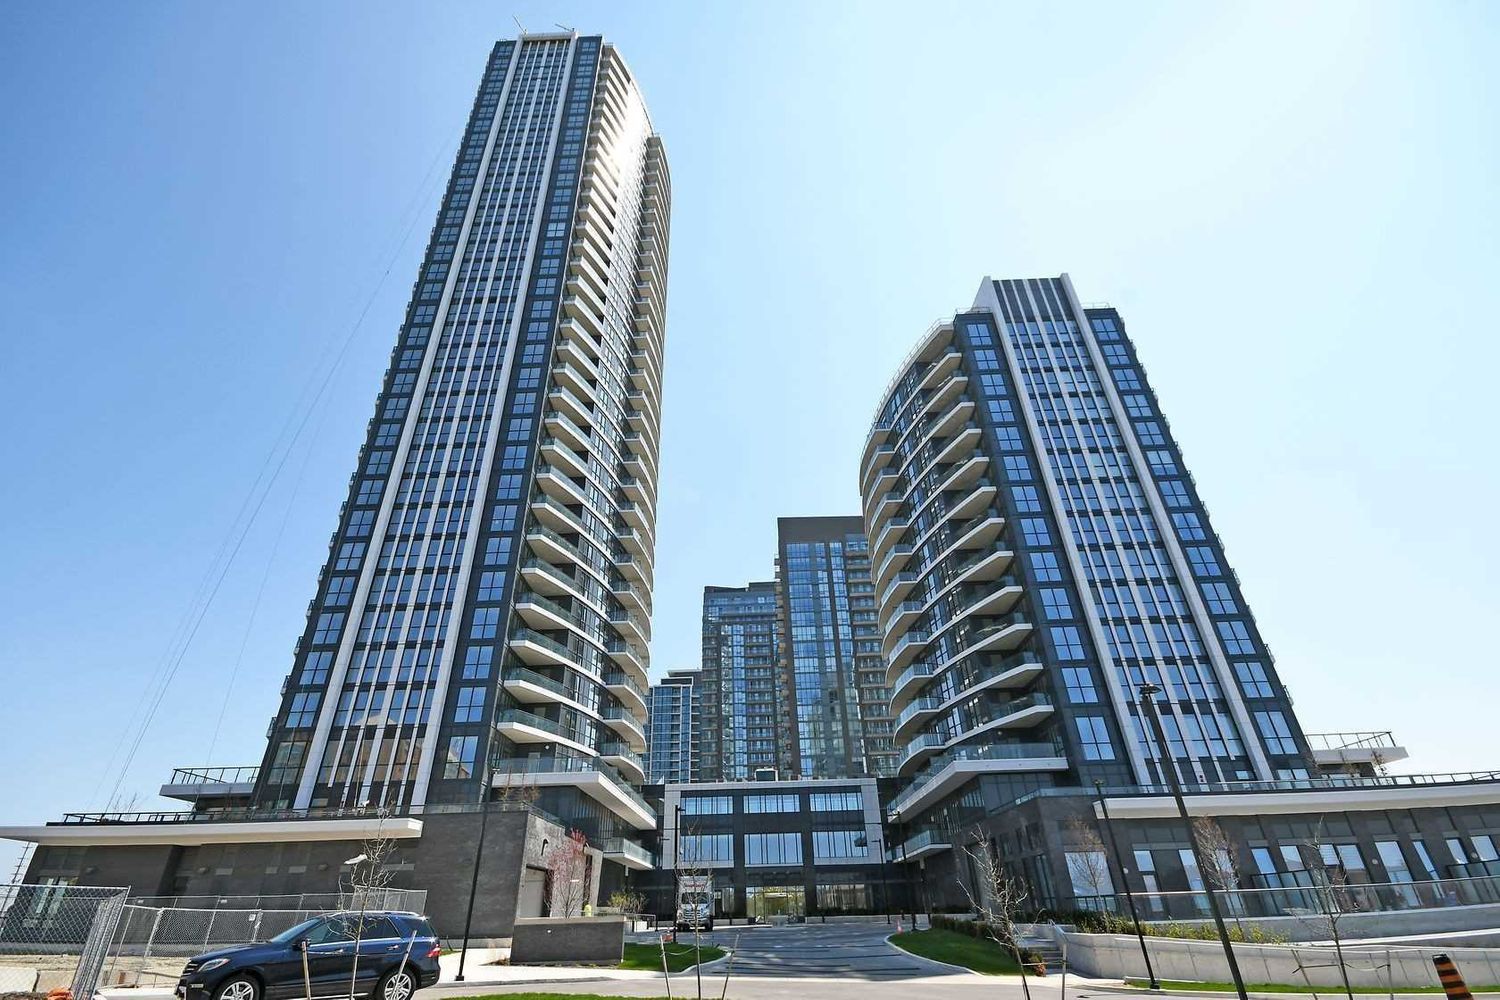 35 Watergarden Drive. Perla Towers is located in  Mississauga, Toronto - image #1 of 2